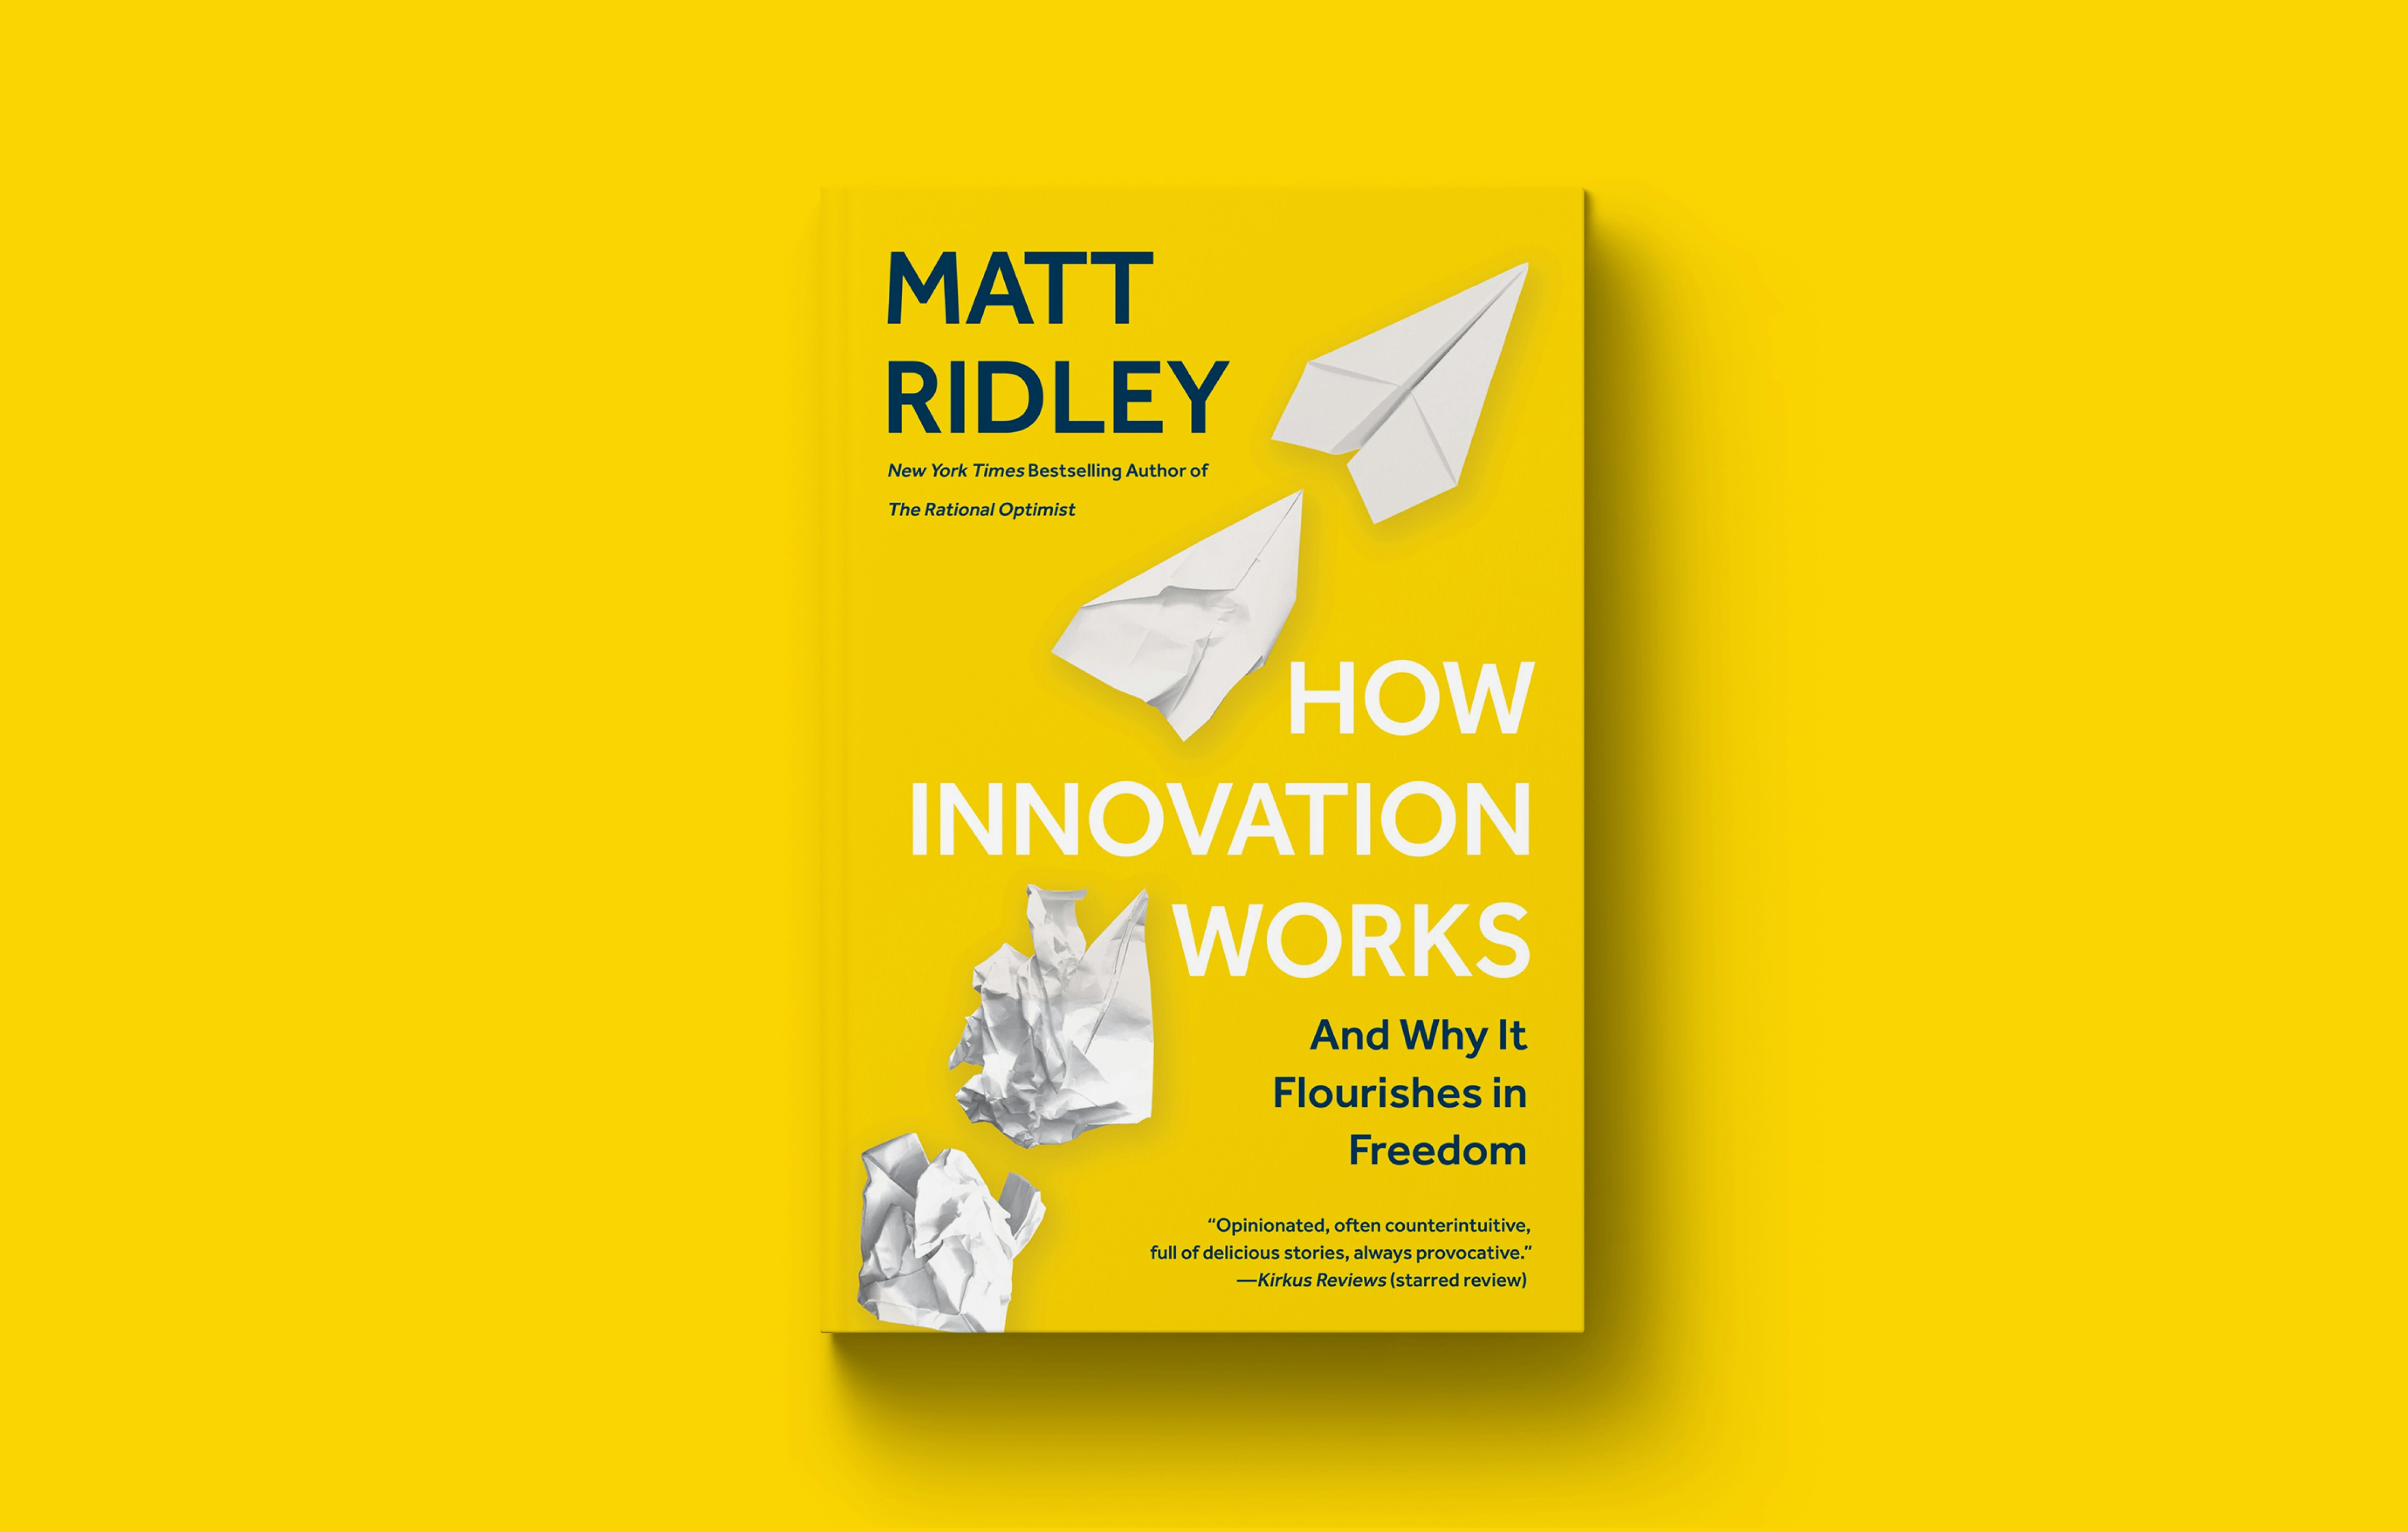 Building on his national bestseller The Rational Optimist, Matt Ridley chronicles the history of innovation, and how we need to change our thinking on the subject.